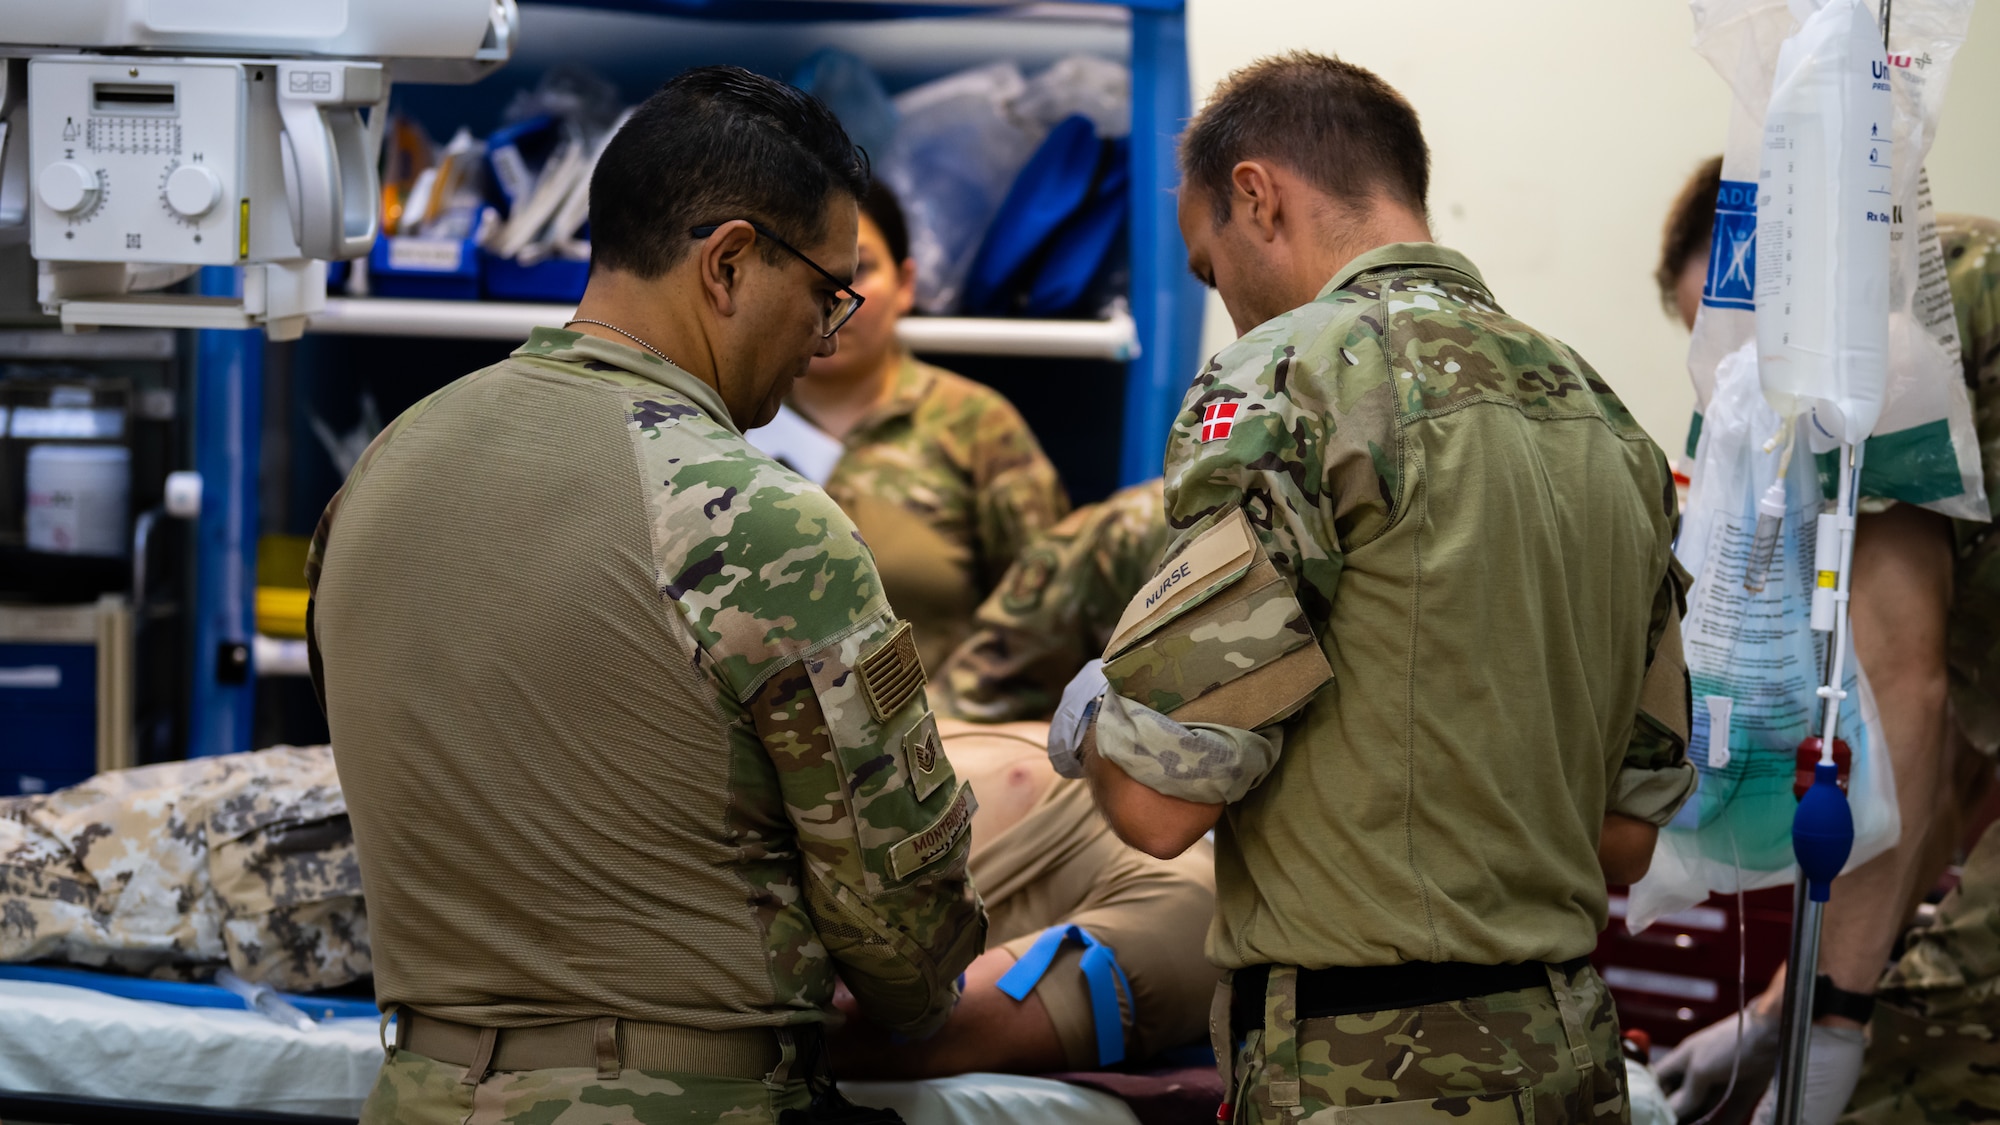 U.S. Air Force Airmen from the 386th Expeditionary Medical Squadron, and a member of the Royal Danish Air Force, tend to the wounds of a victim from a simulated aircraft crash during a medical response exercise at Ali Al Salem Air Base, Kuwait, July 17, 2023. This exercise tested the emergency response systems of U.S. and coalition forces, which allowed for a better understanding of how they can communicate and operate together in the event of a real-world emergency. (U.S. Air Force photo by Staff Sgt. Kevin Long)